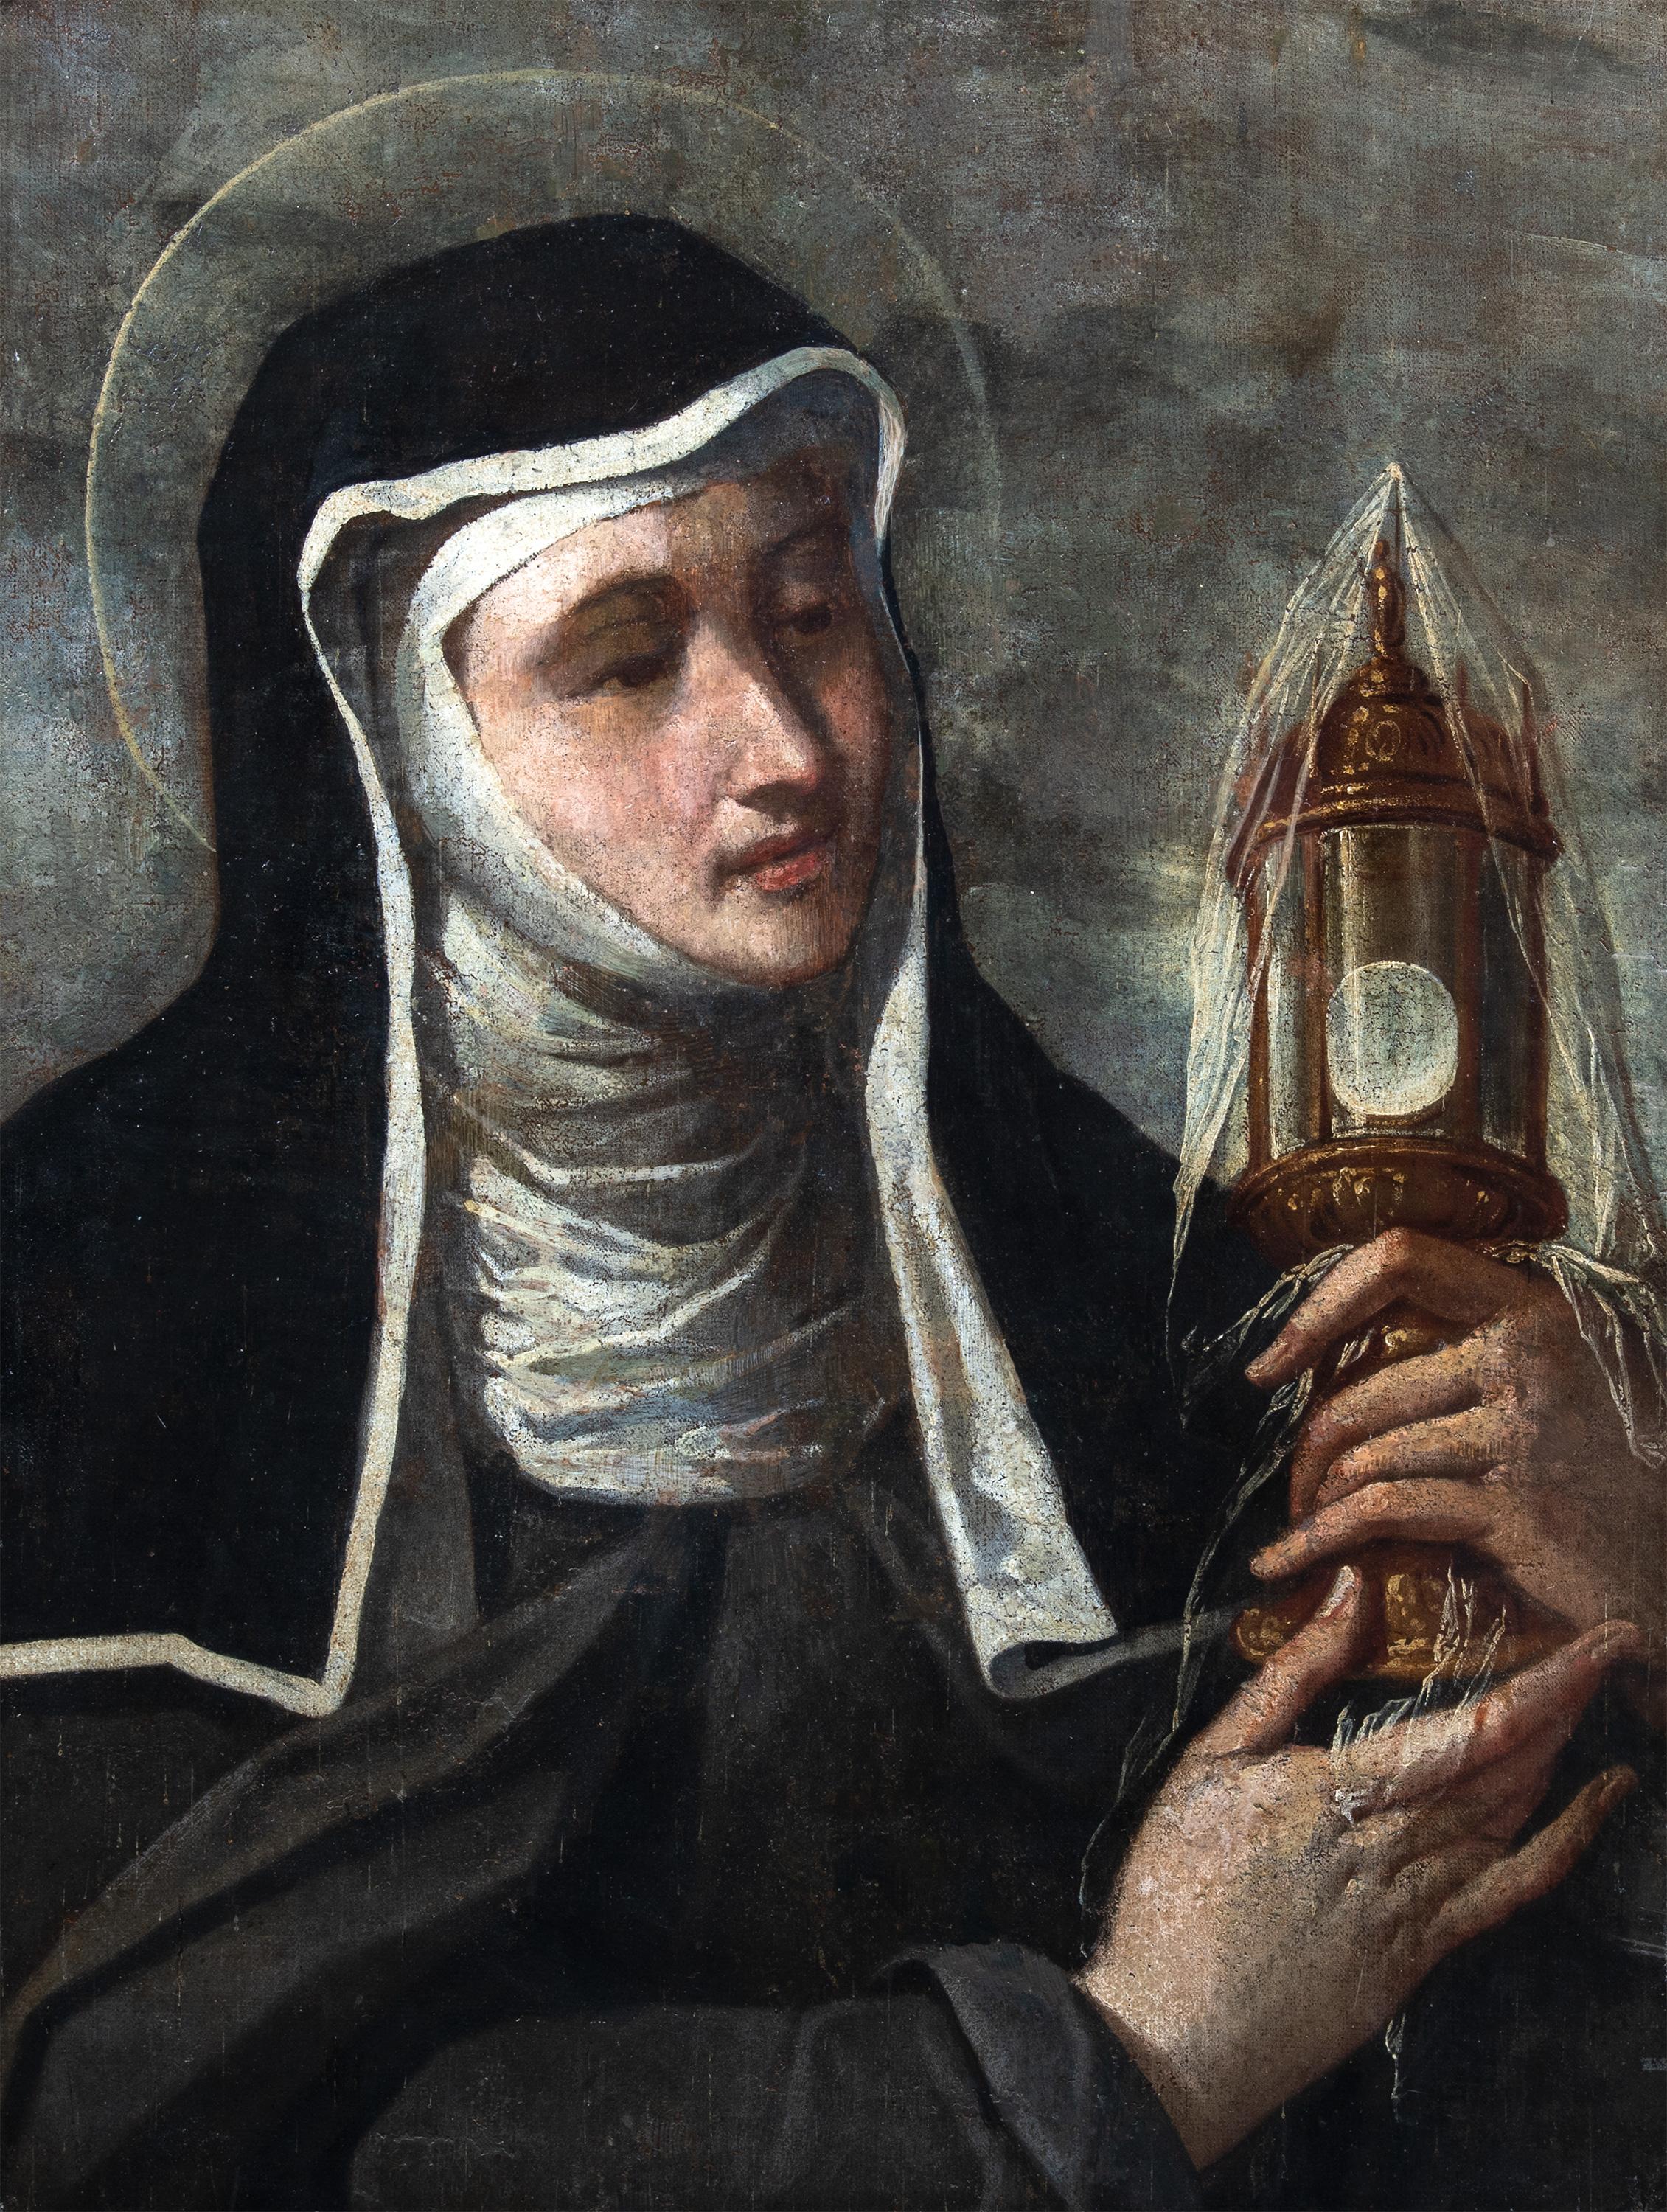 Unknown Figurative Painting - 17-18th century Italian figure painting - Saint Clare - Oil on canvas Italy